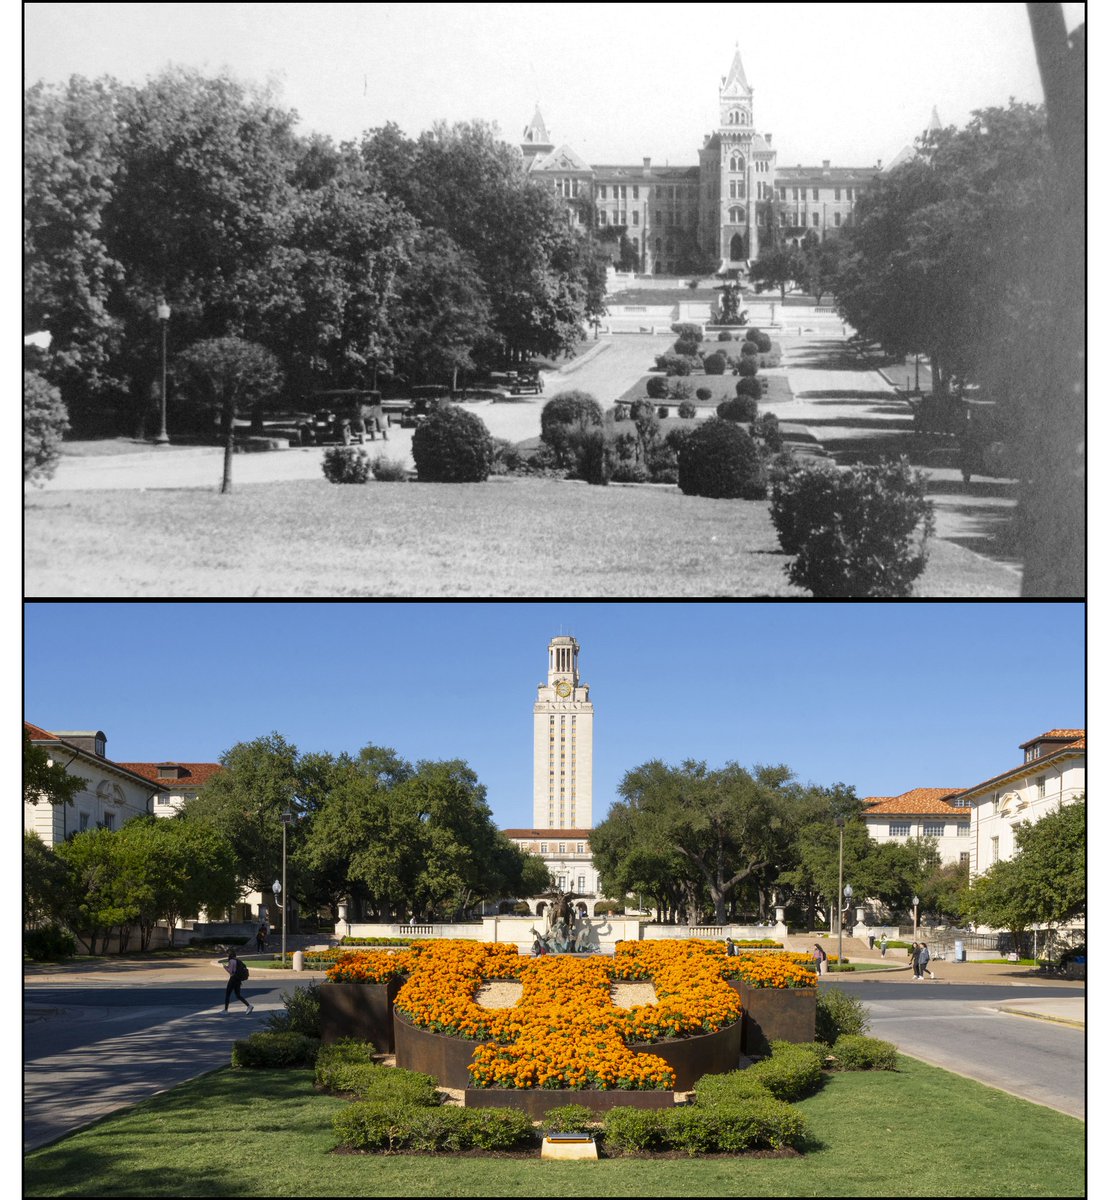 Then and now. 1933 and 2024: Looking down University Avenue toward @UTAustin's Littlefield Fountain and either Old Main or the current Main Building and Tower. The view has changed a bit, and there was more parking back then.